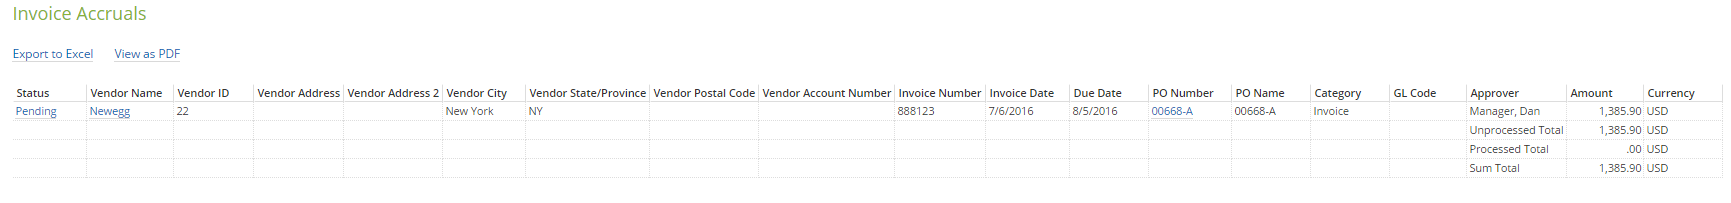 Invoice_Accruals_2.png